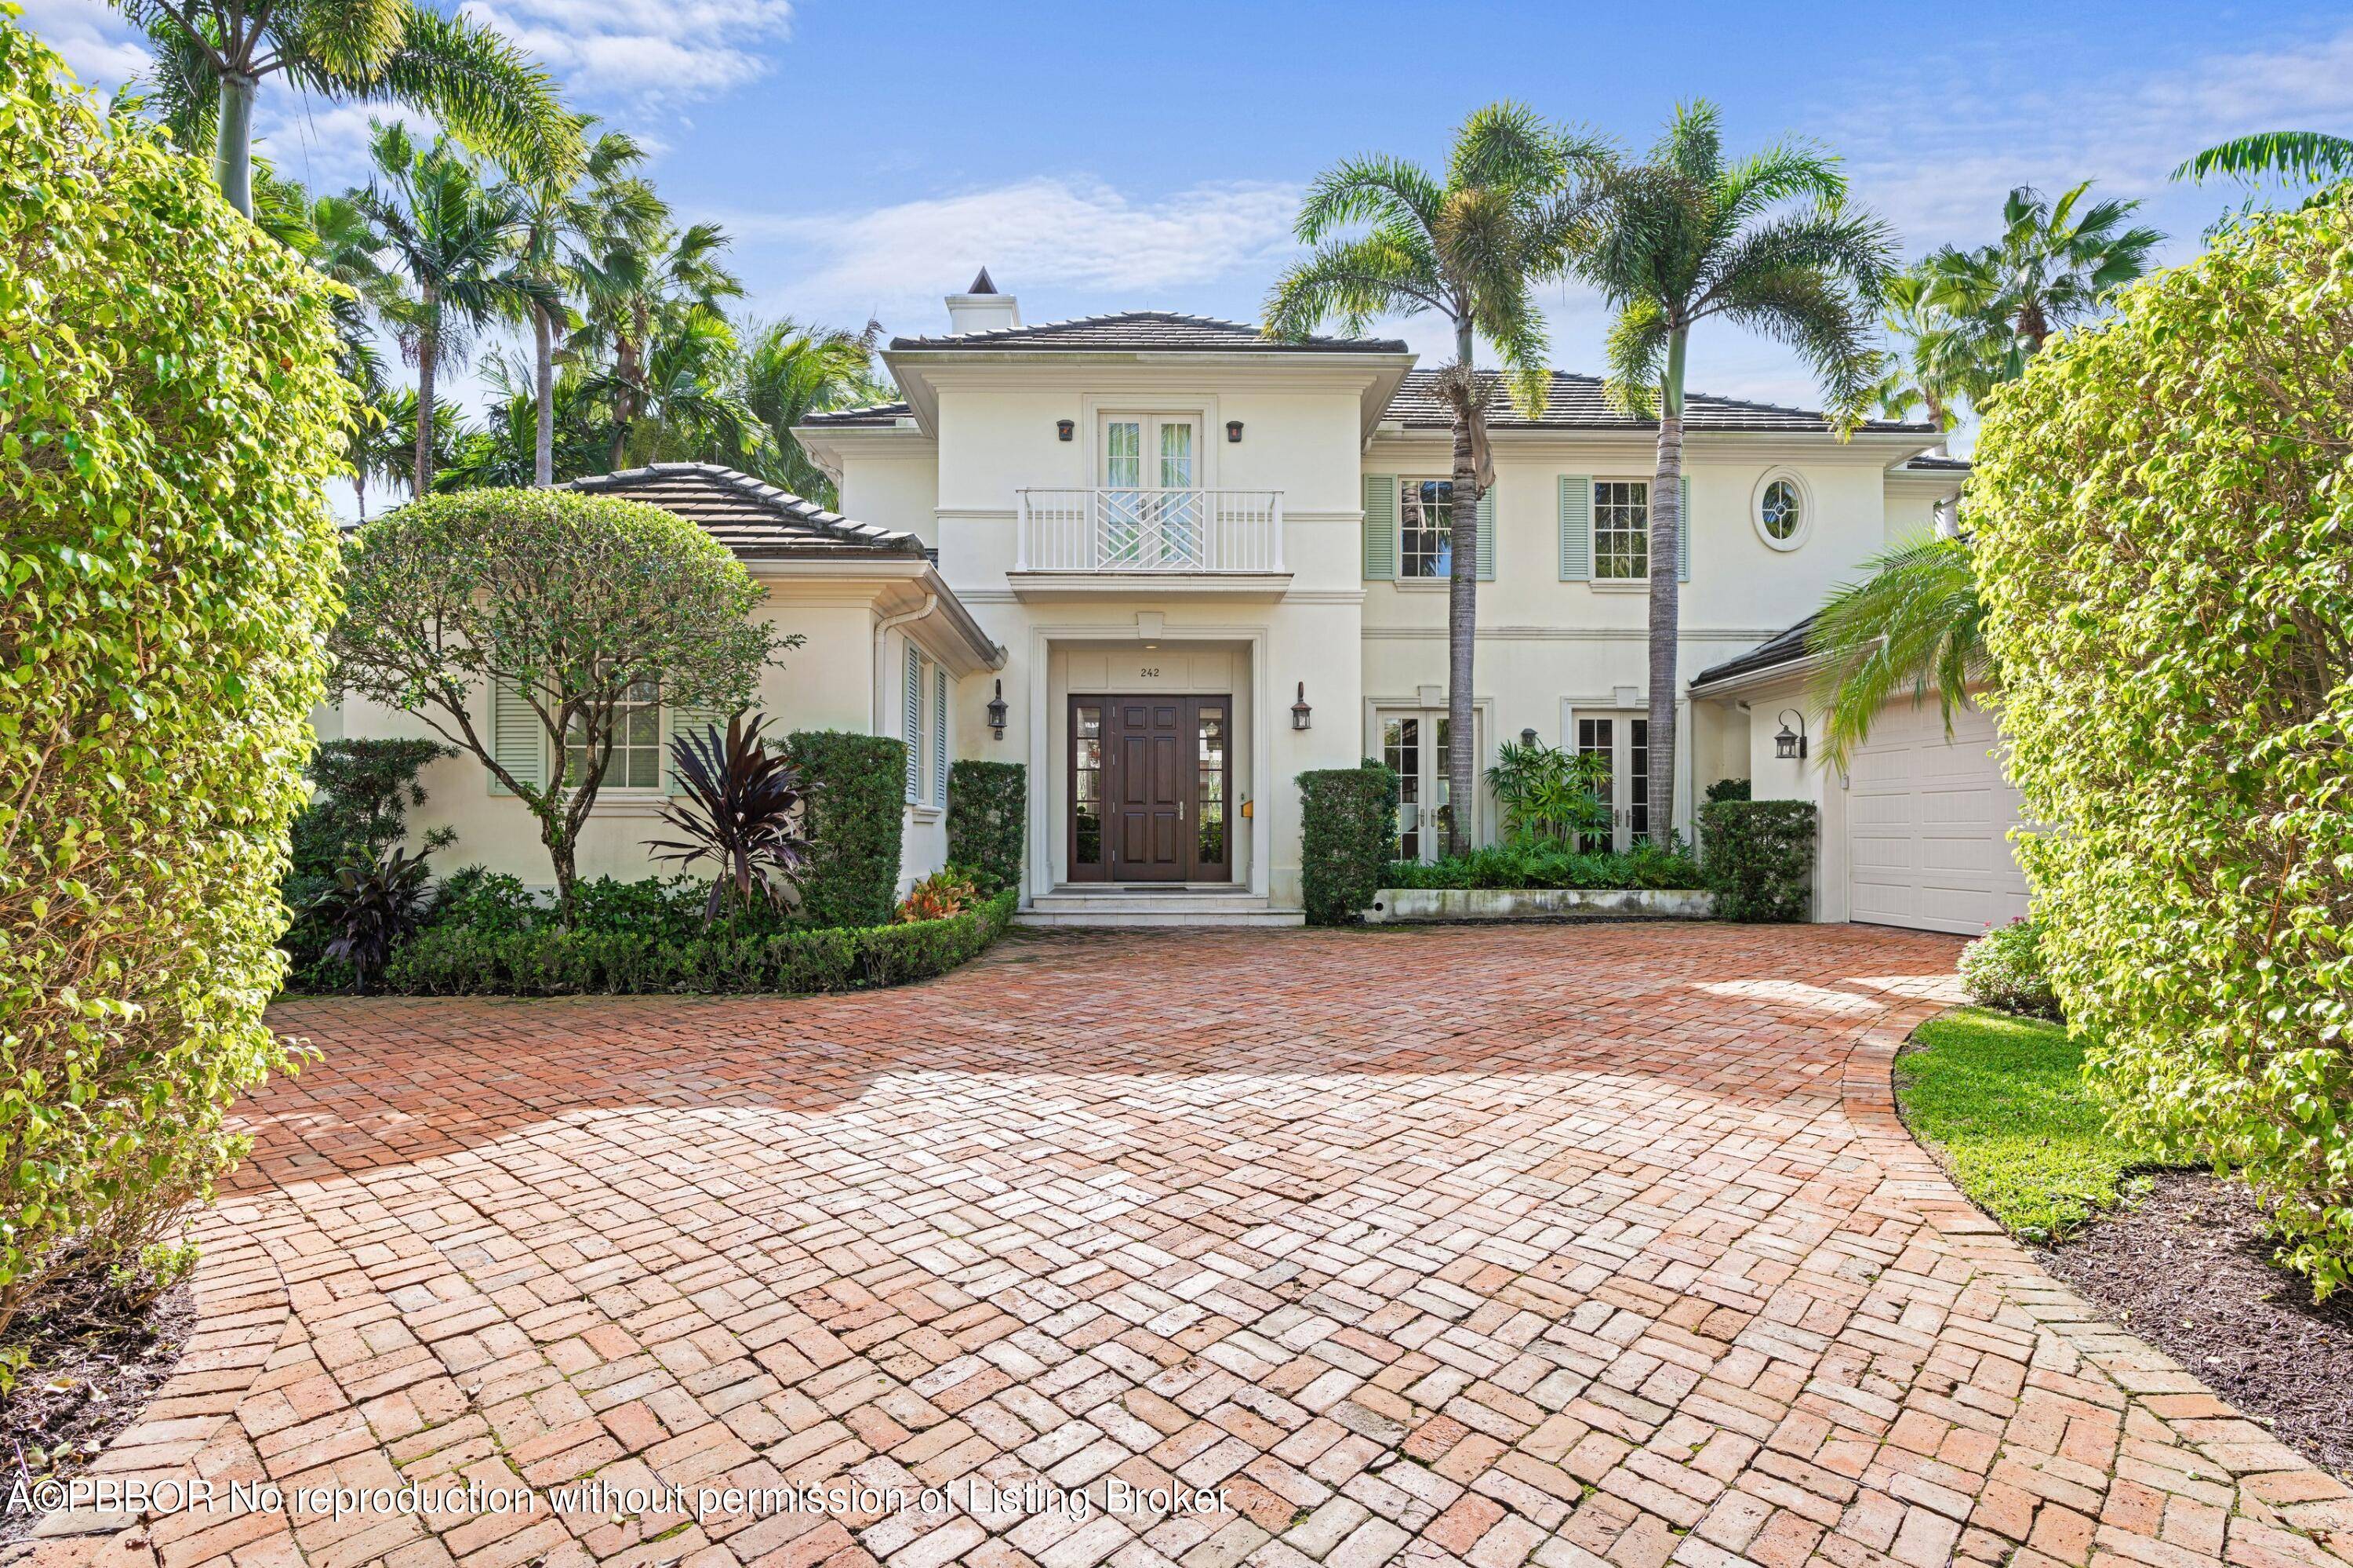 Beautiful home is the north end of Palm Beach.